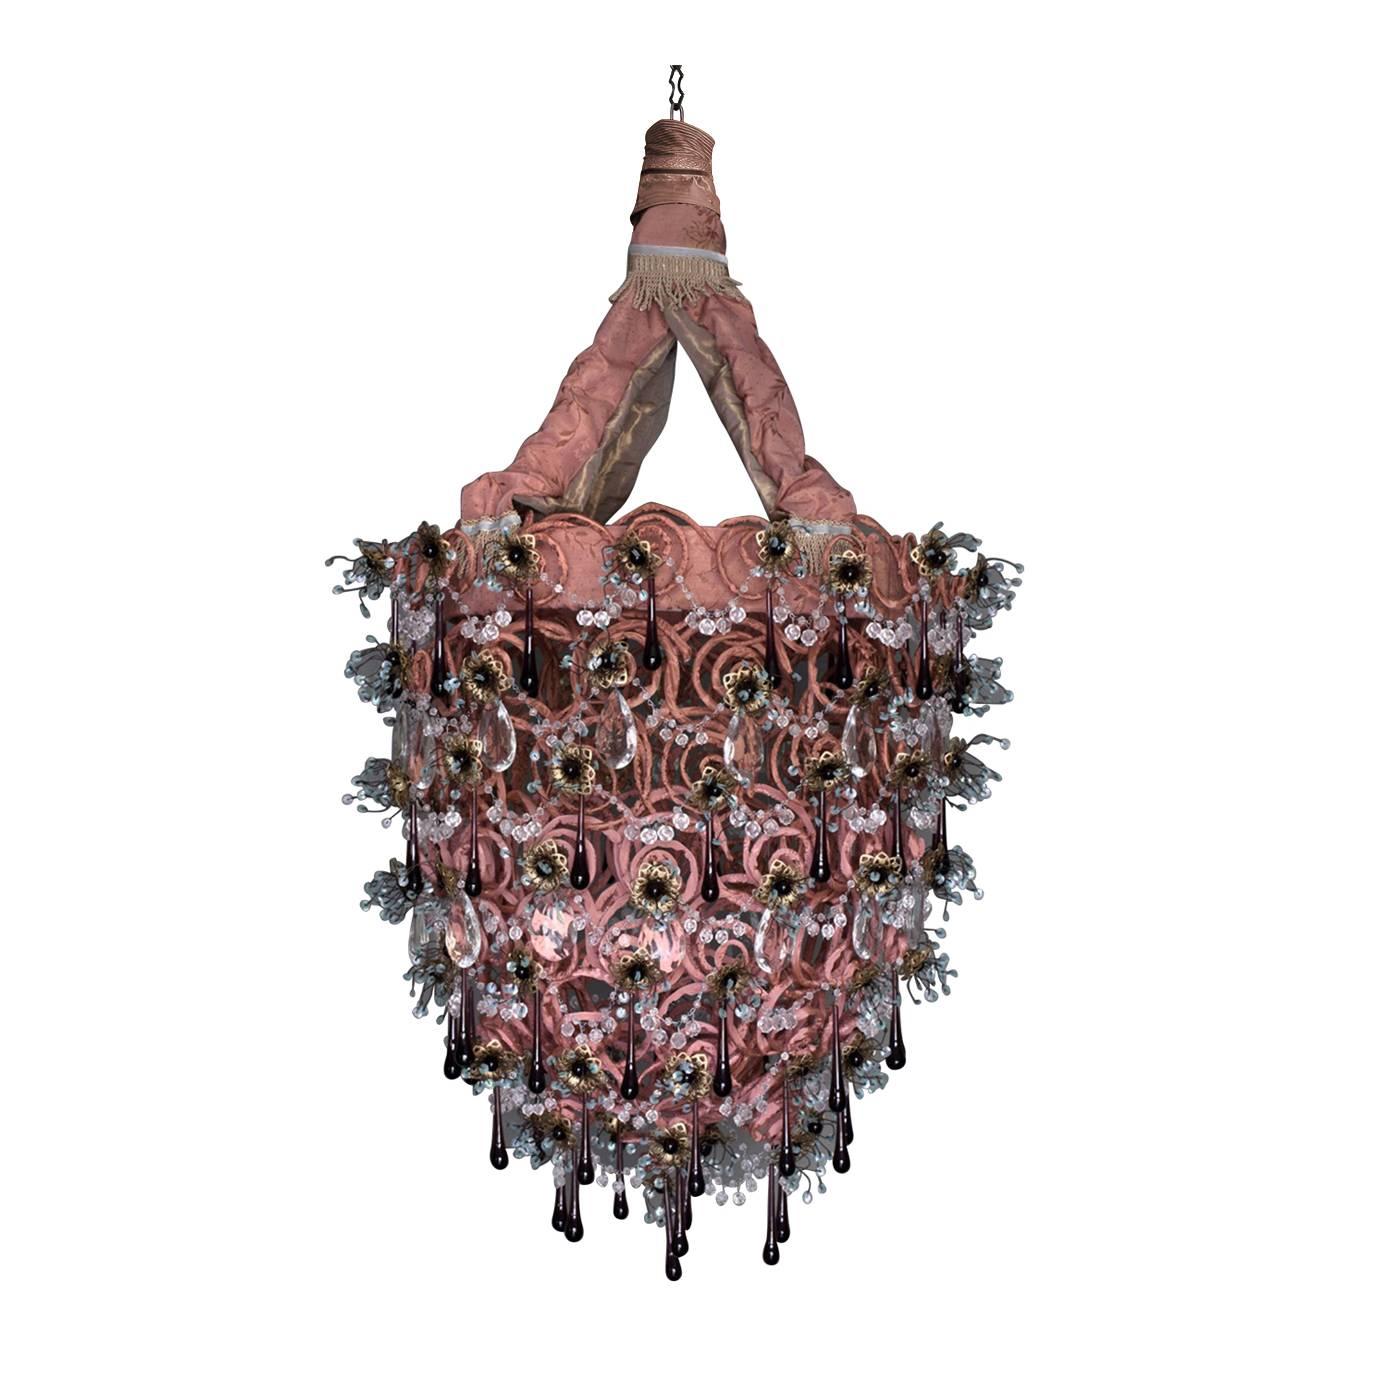 Trimming, glass, iron, sequins and delicate brass flower decorations adorn the iron structure of this object d'art that is comprised of 99 meters of spirals covered with a double layer of soft pink velvet.